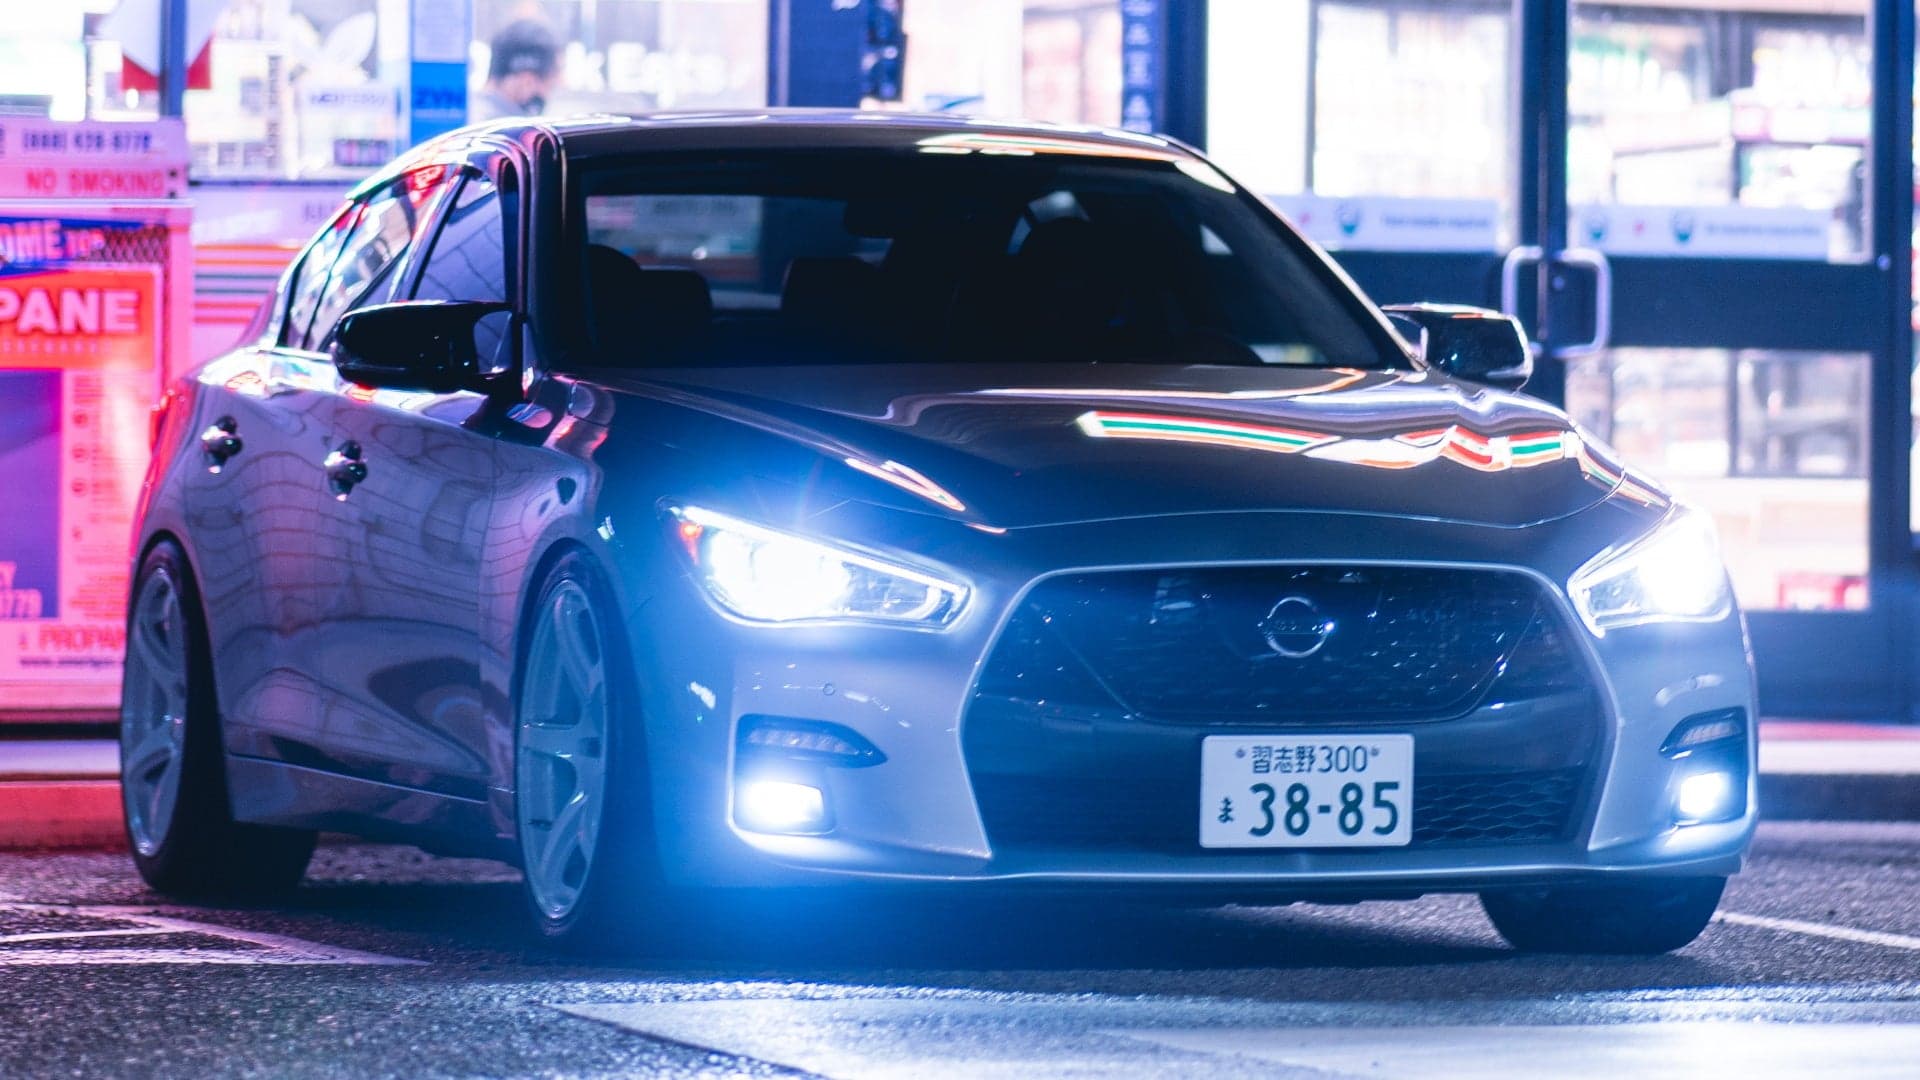 This Manual-Swapped Infiniti Q50 Is a Proper Stateside Skyline